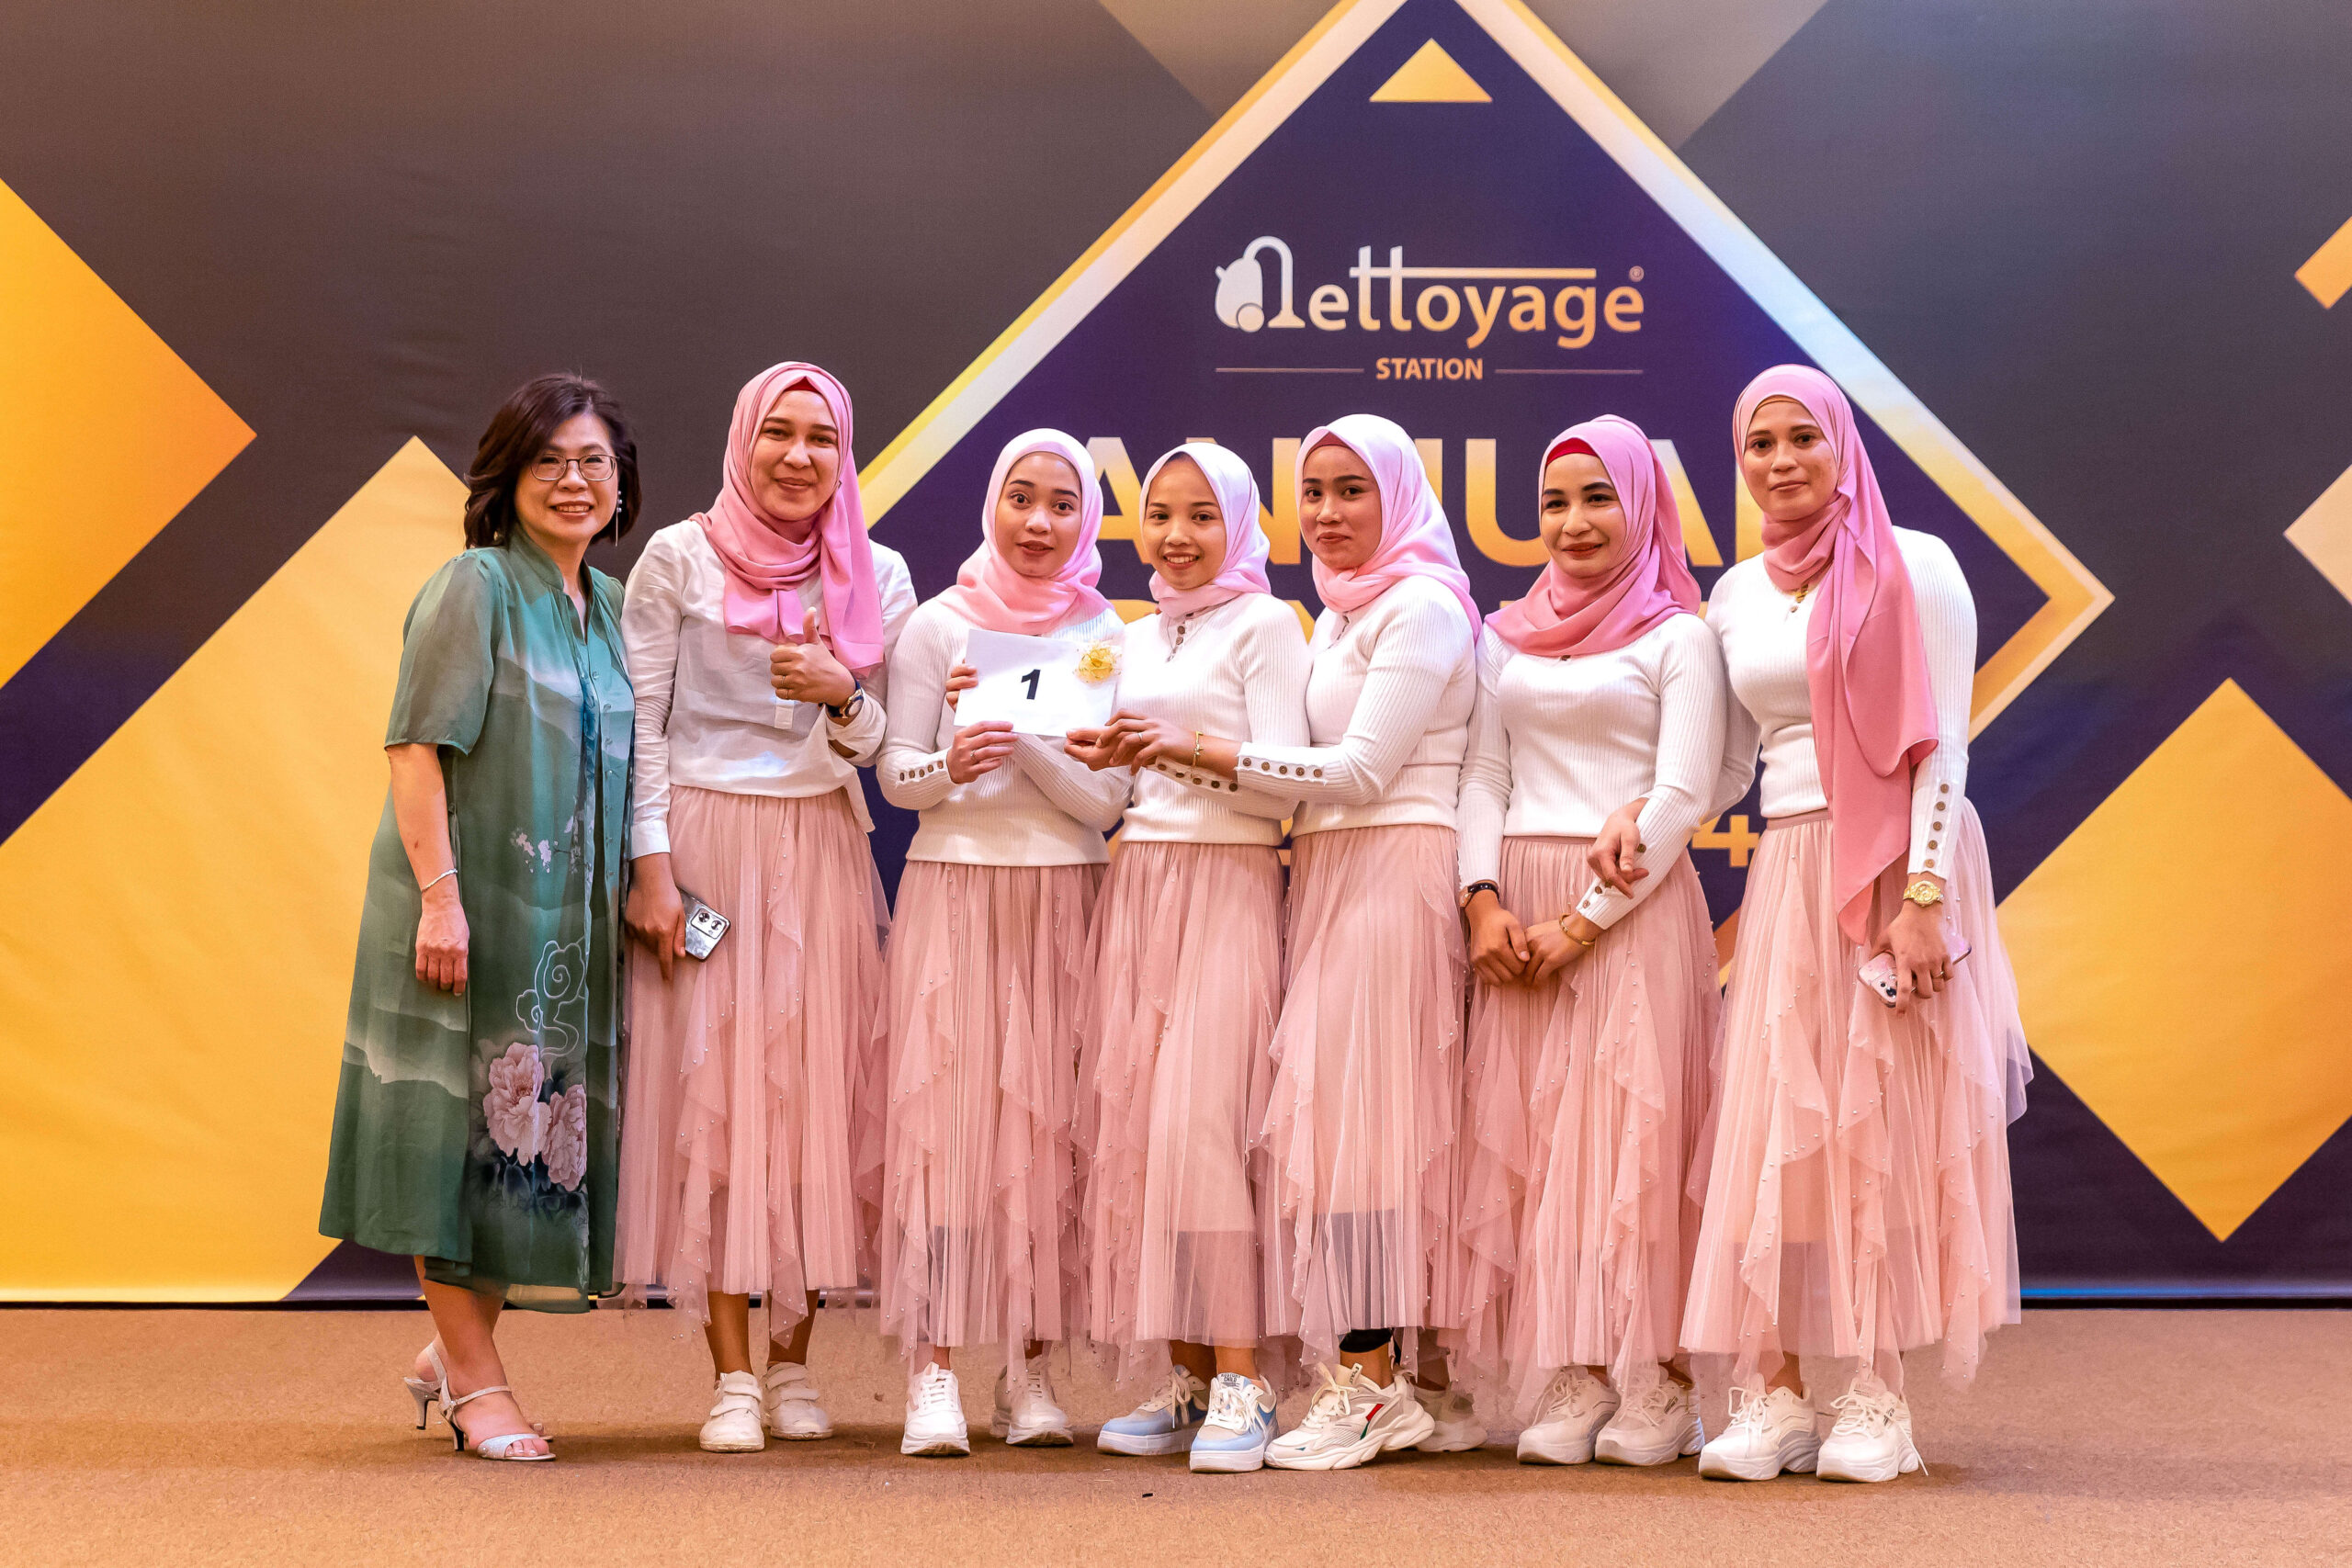 Nettoyage Station Annual Dinner 2023 / 2024